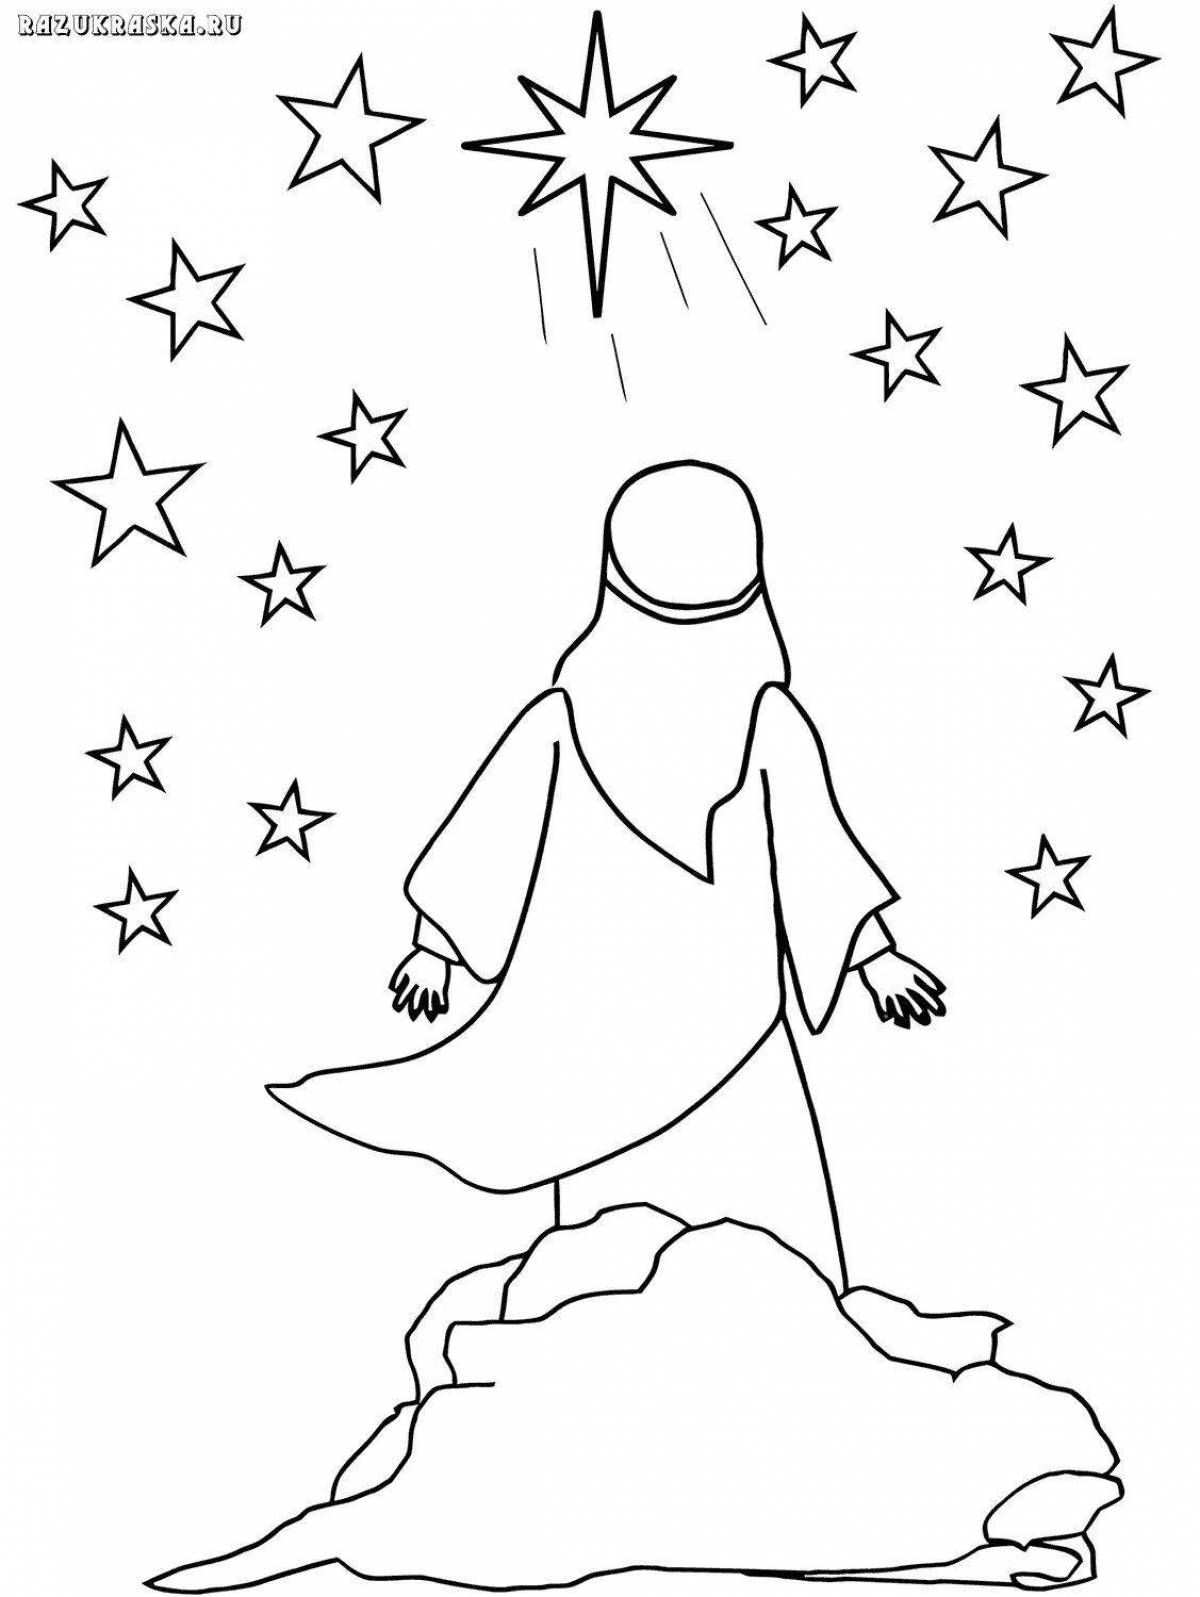 Playful christmas star coloring page for kids